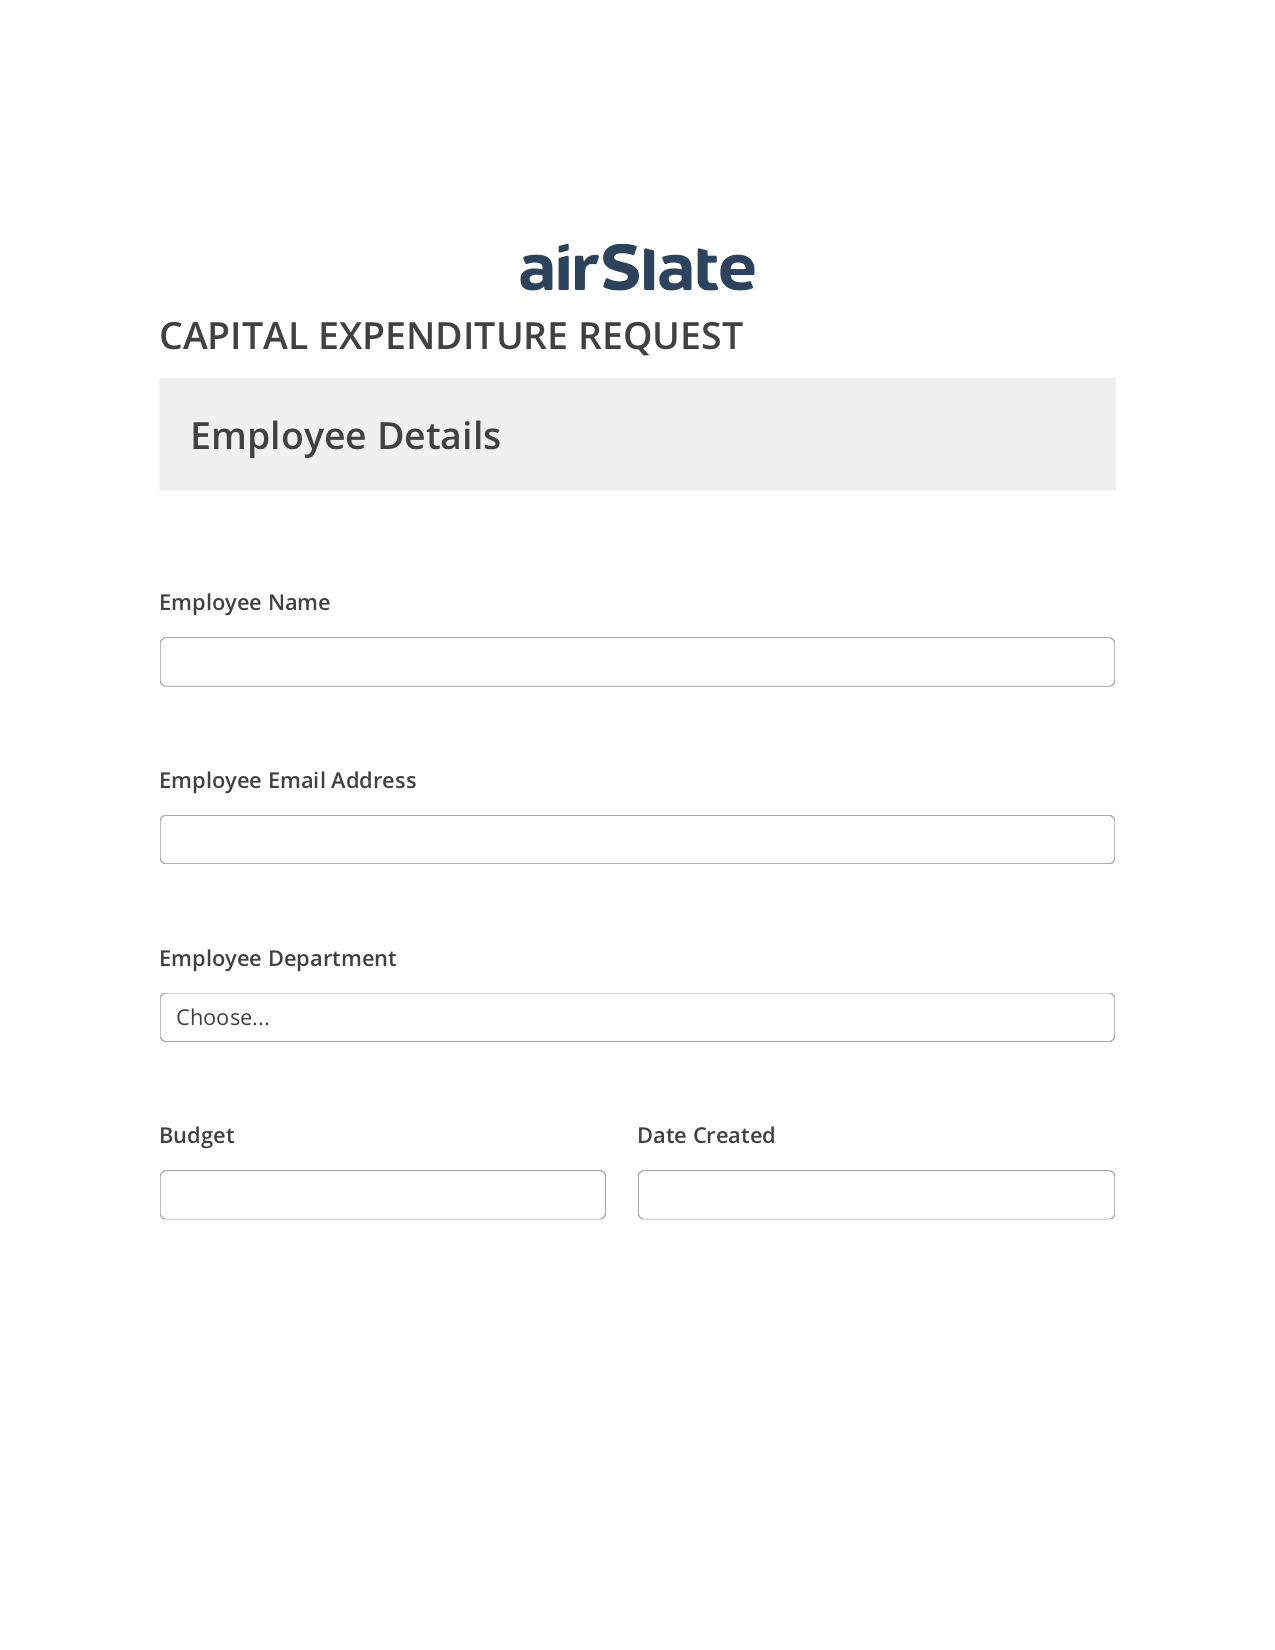 Capital Expenditure Request Approval Workflow Pre-fill from another Slate Bot, Remove Slate Bot, Archive to OneDrive Bot